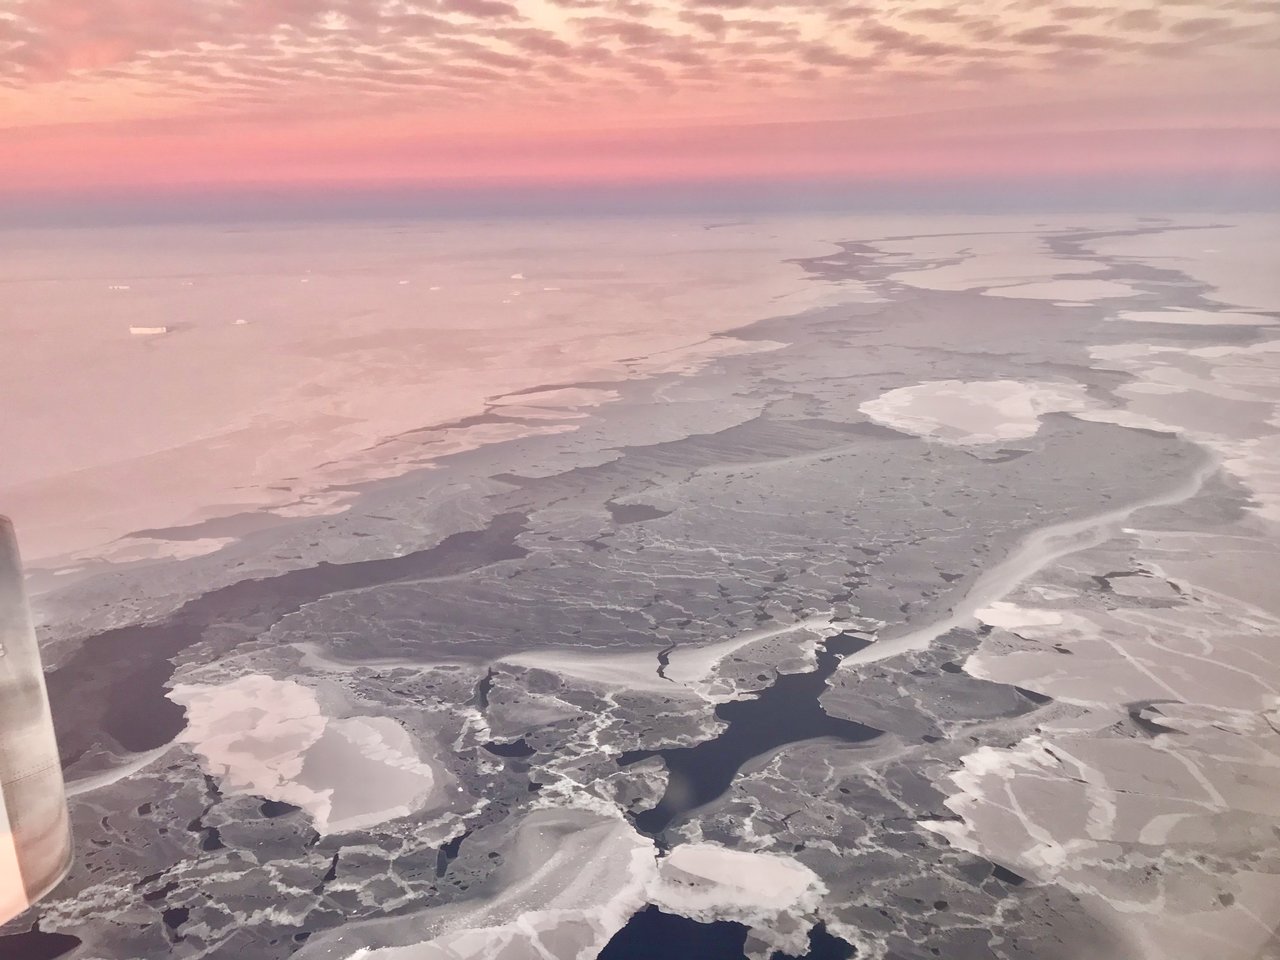 New sea ice growing in a lead at different stages of formation with the pink skies creating nice lighting on the ice. Credit: NASA/Linette Boisvert